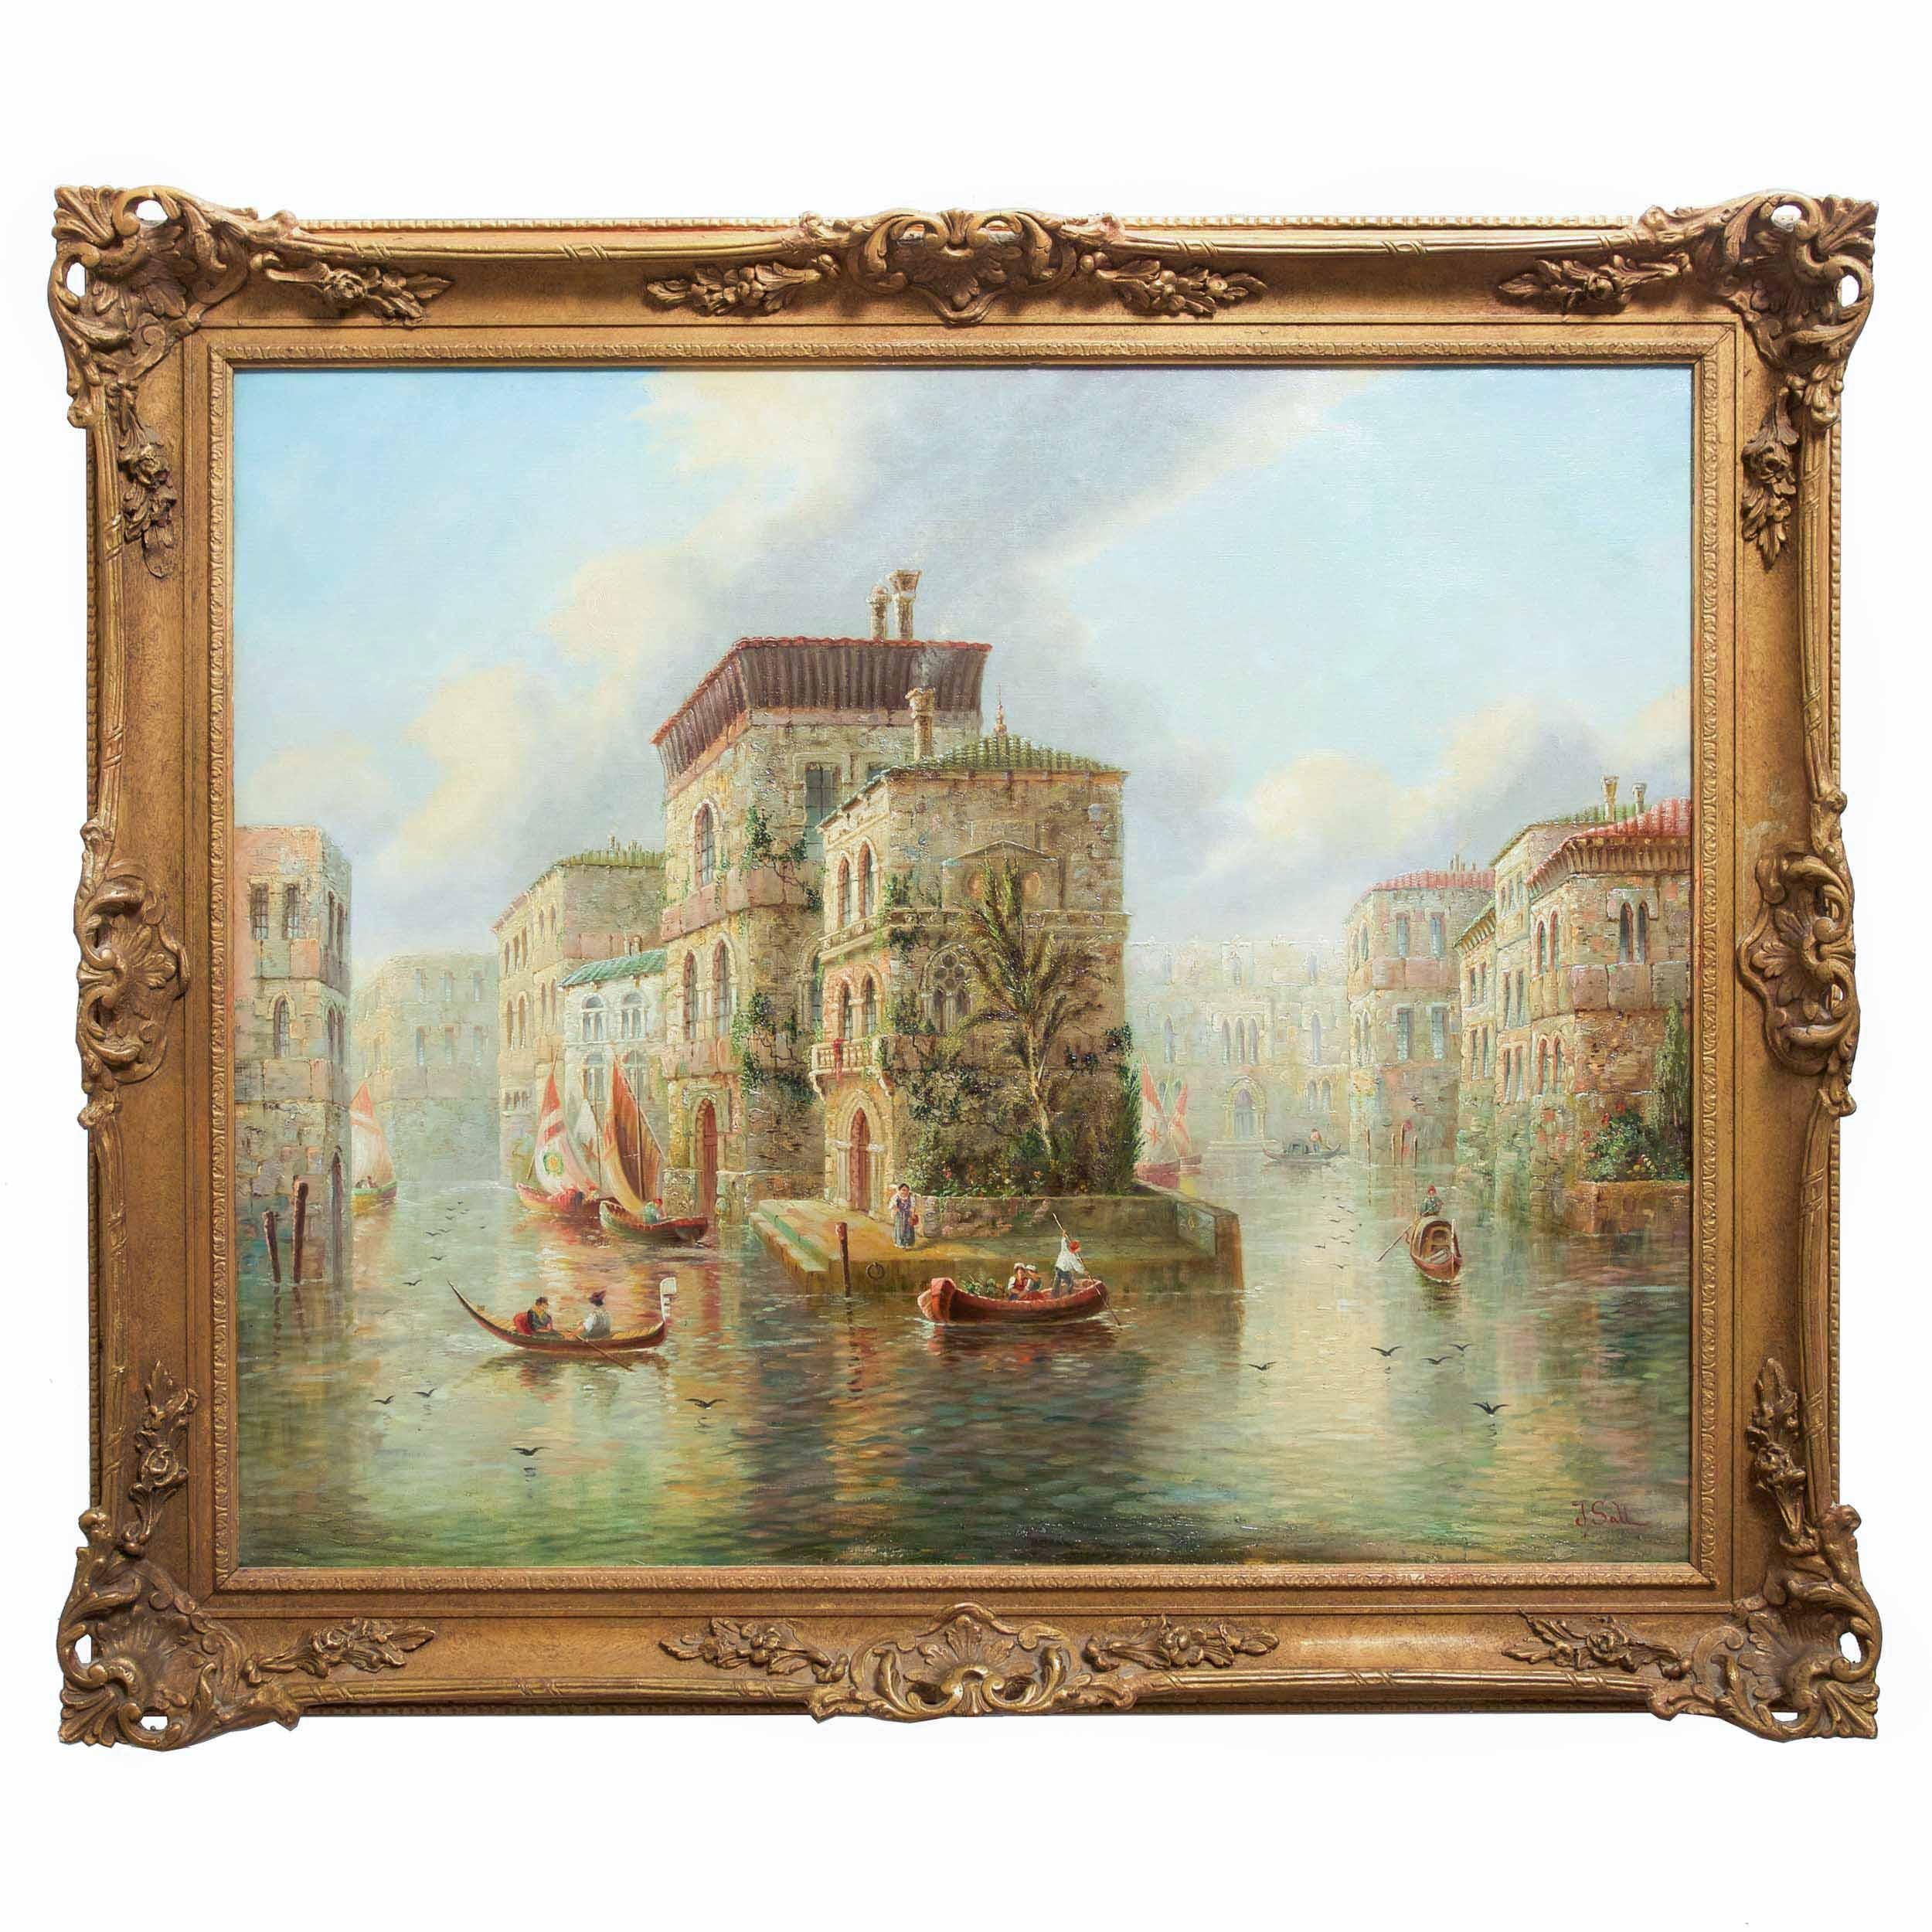 An evocative nostalgic work that captures a vision of the canals of Venice, it was a specialty of James Salt to complete these 